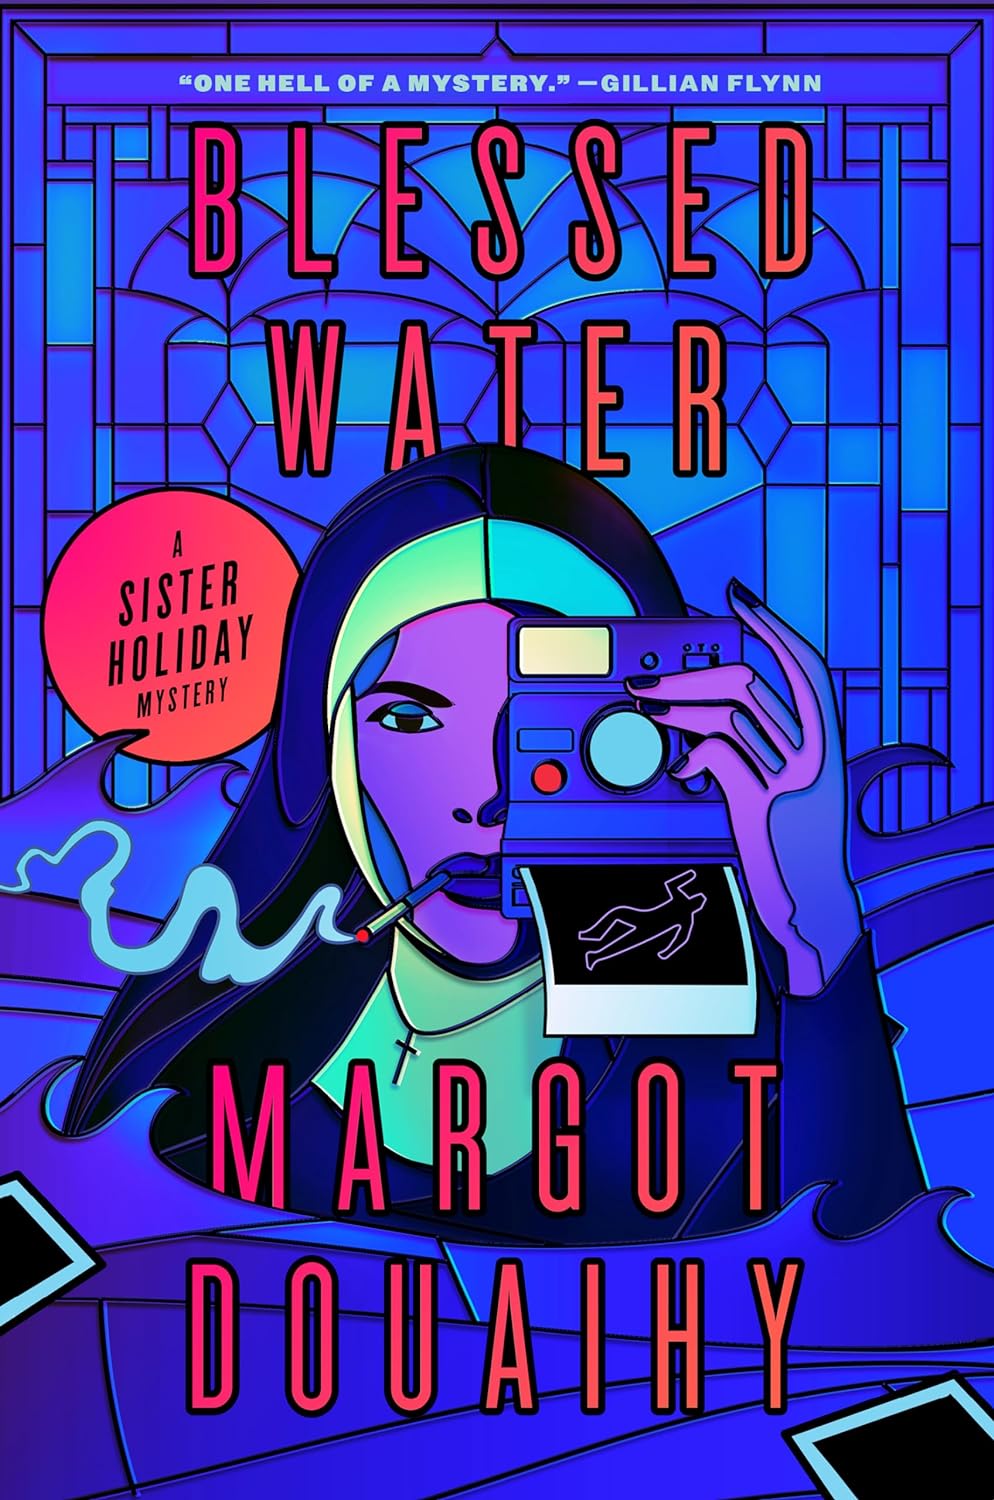 Image for "Blessed Water"